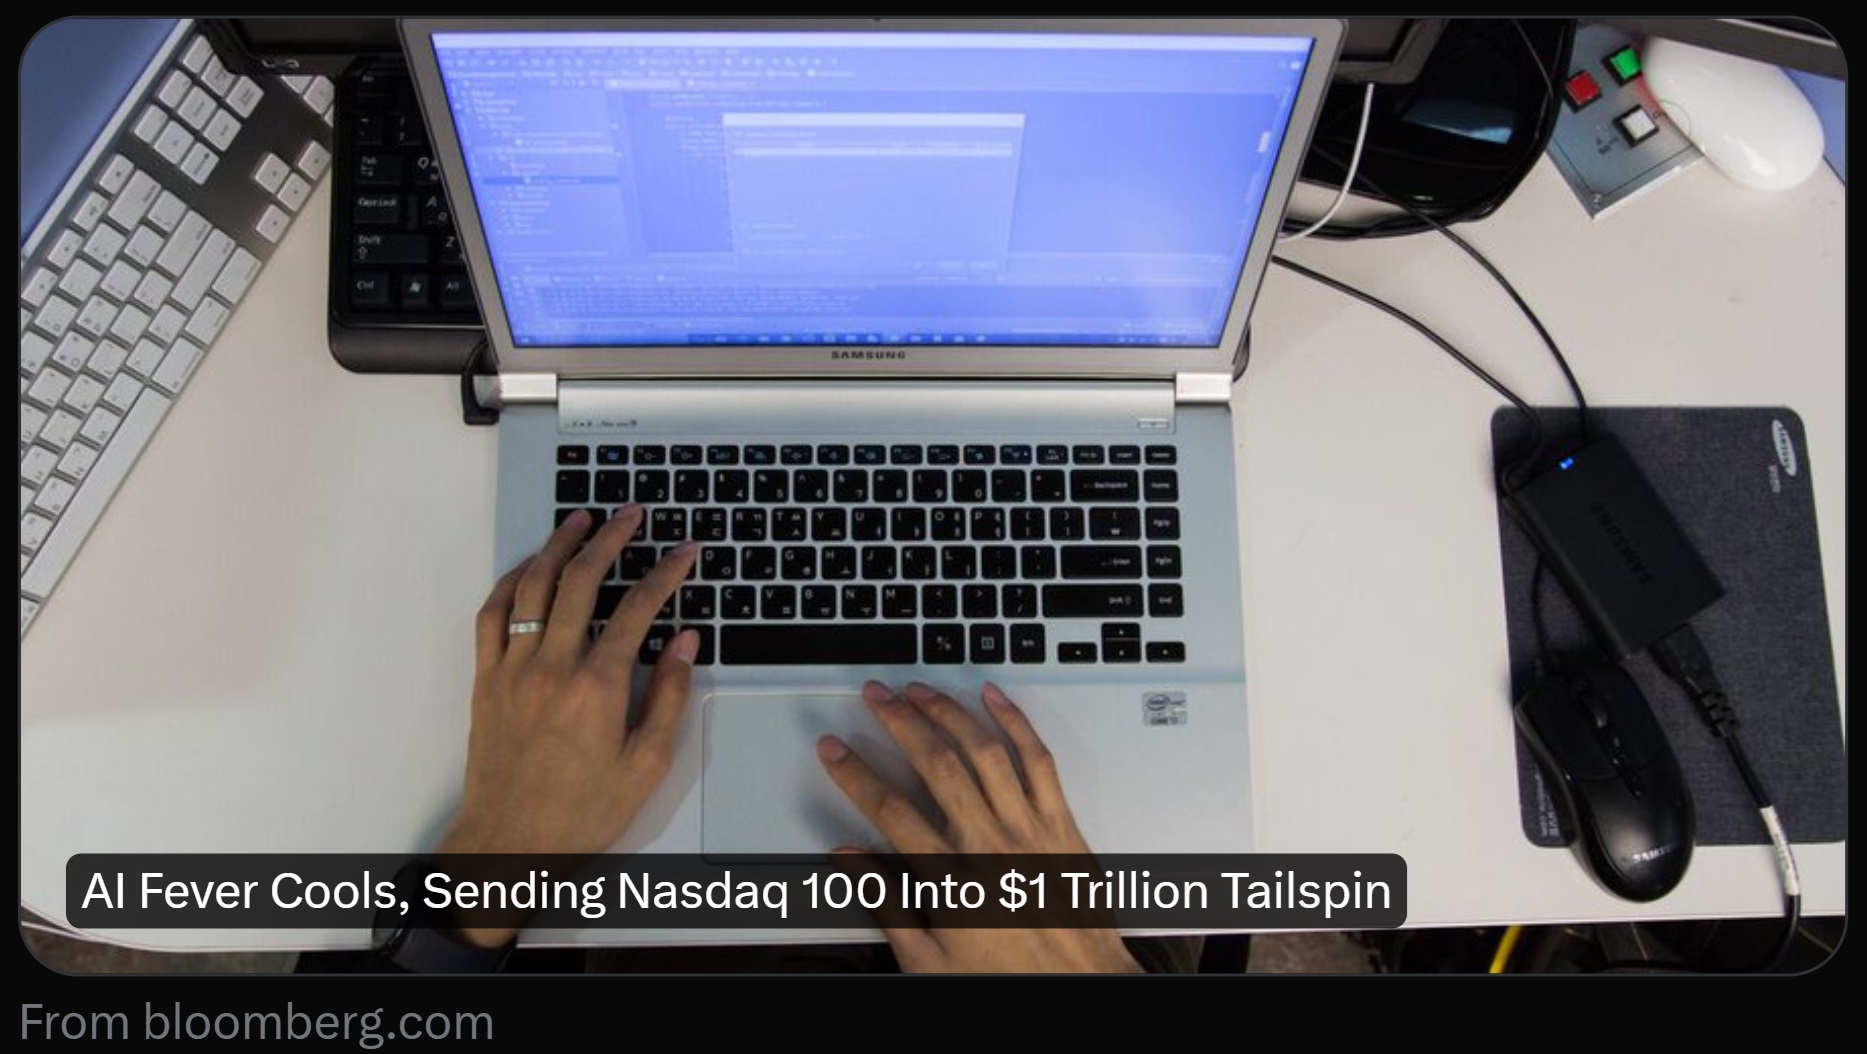 AI Fever Cools | Sending Nasdaq 100 Into $1 Trillion Tailspin – Bloomberg